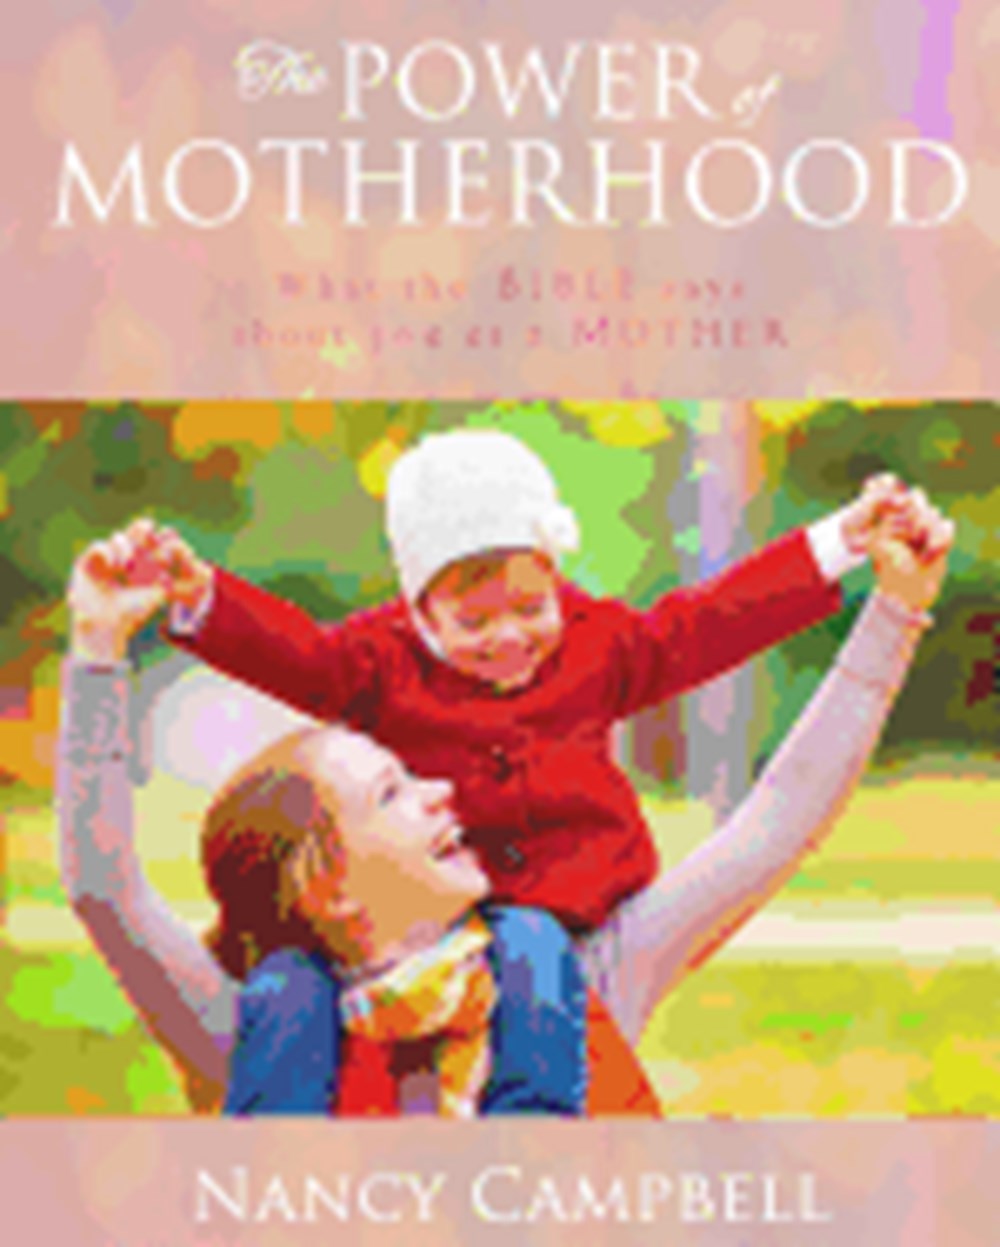 Power of Motherhood: What the Bible says about Mothers (A Classic Manual for Mothers)